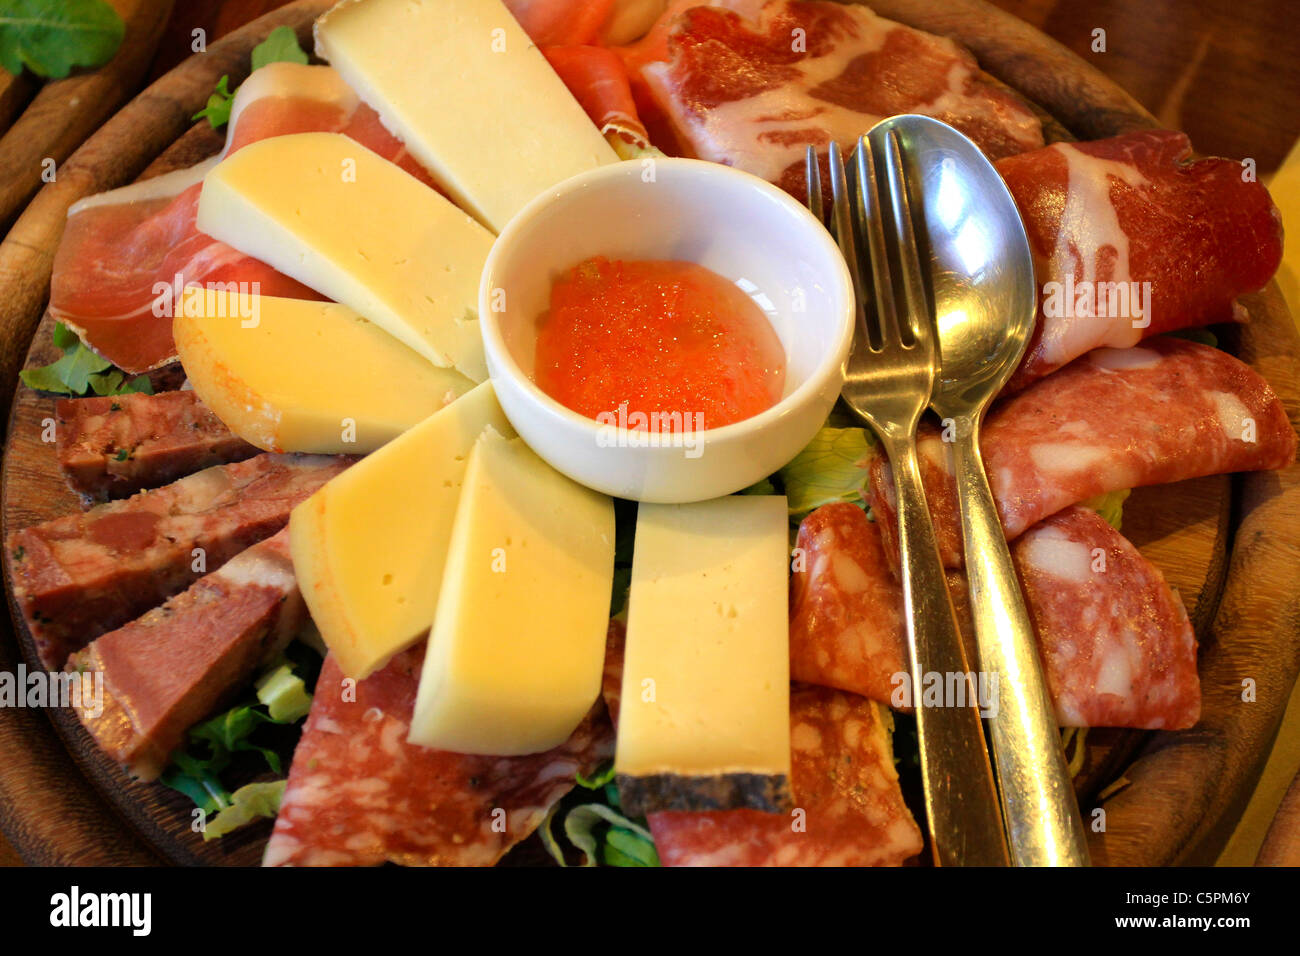 Food, meats and cheeses from Tuscany, Tuscan specialties Stock Photo